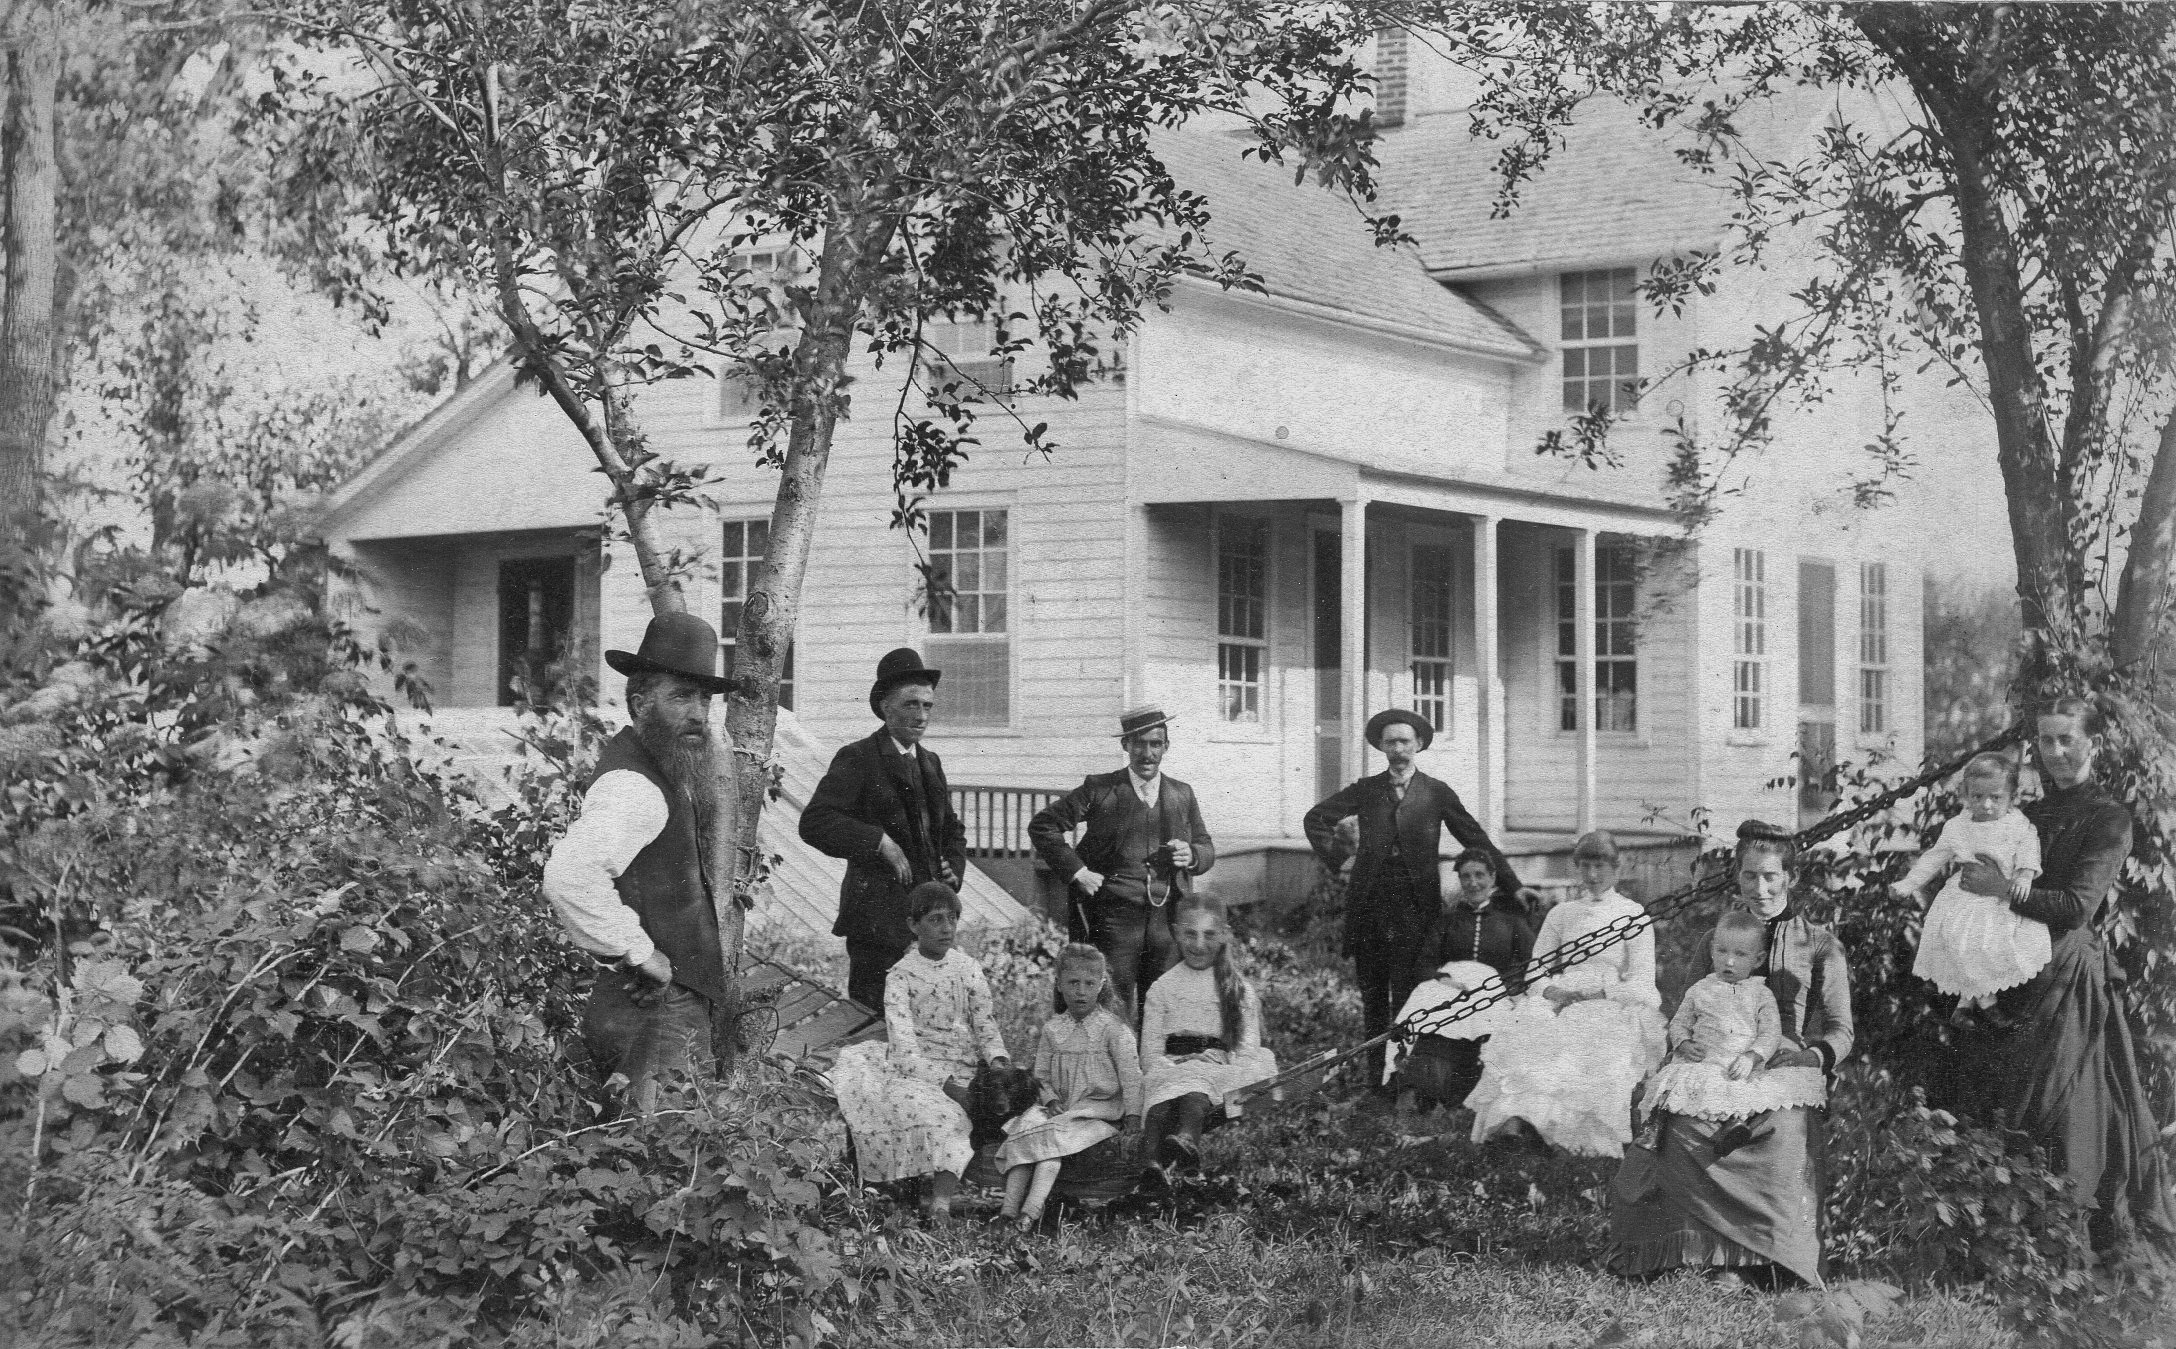 Large family in front of their Upright Wing Farmhouse ca. 1880